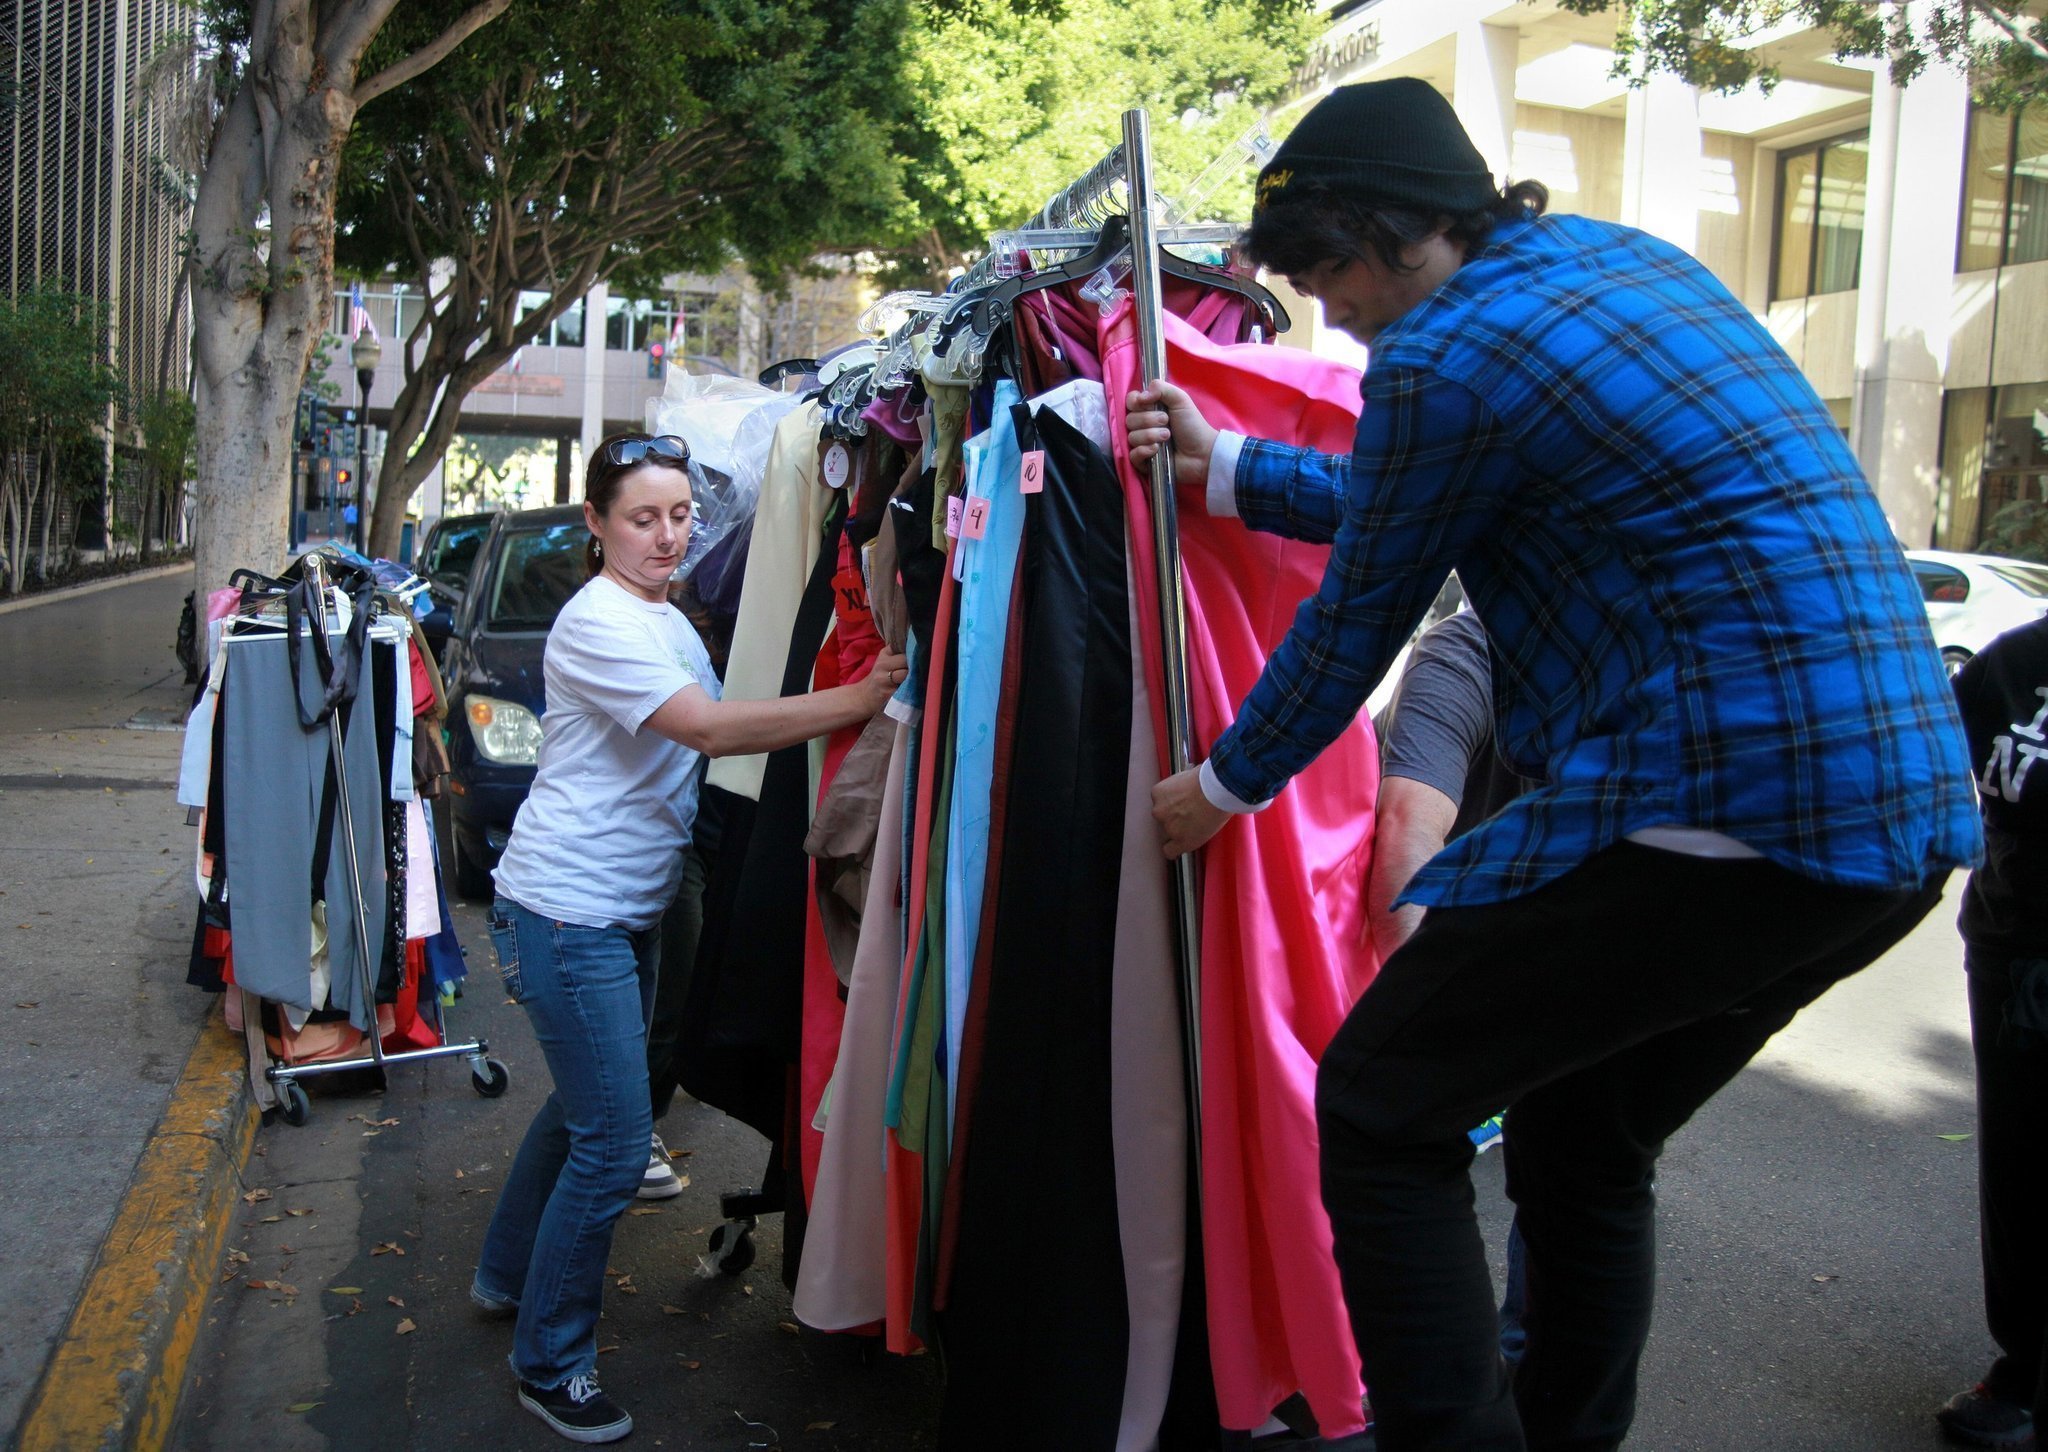 Princess Project seeks prom dresses for low-income teens - The San ...